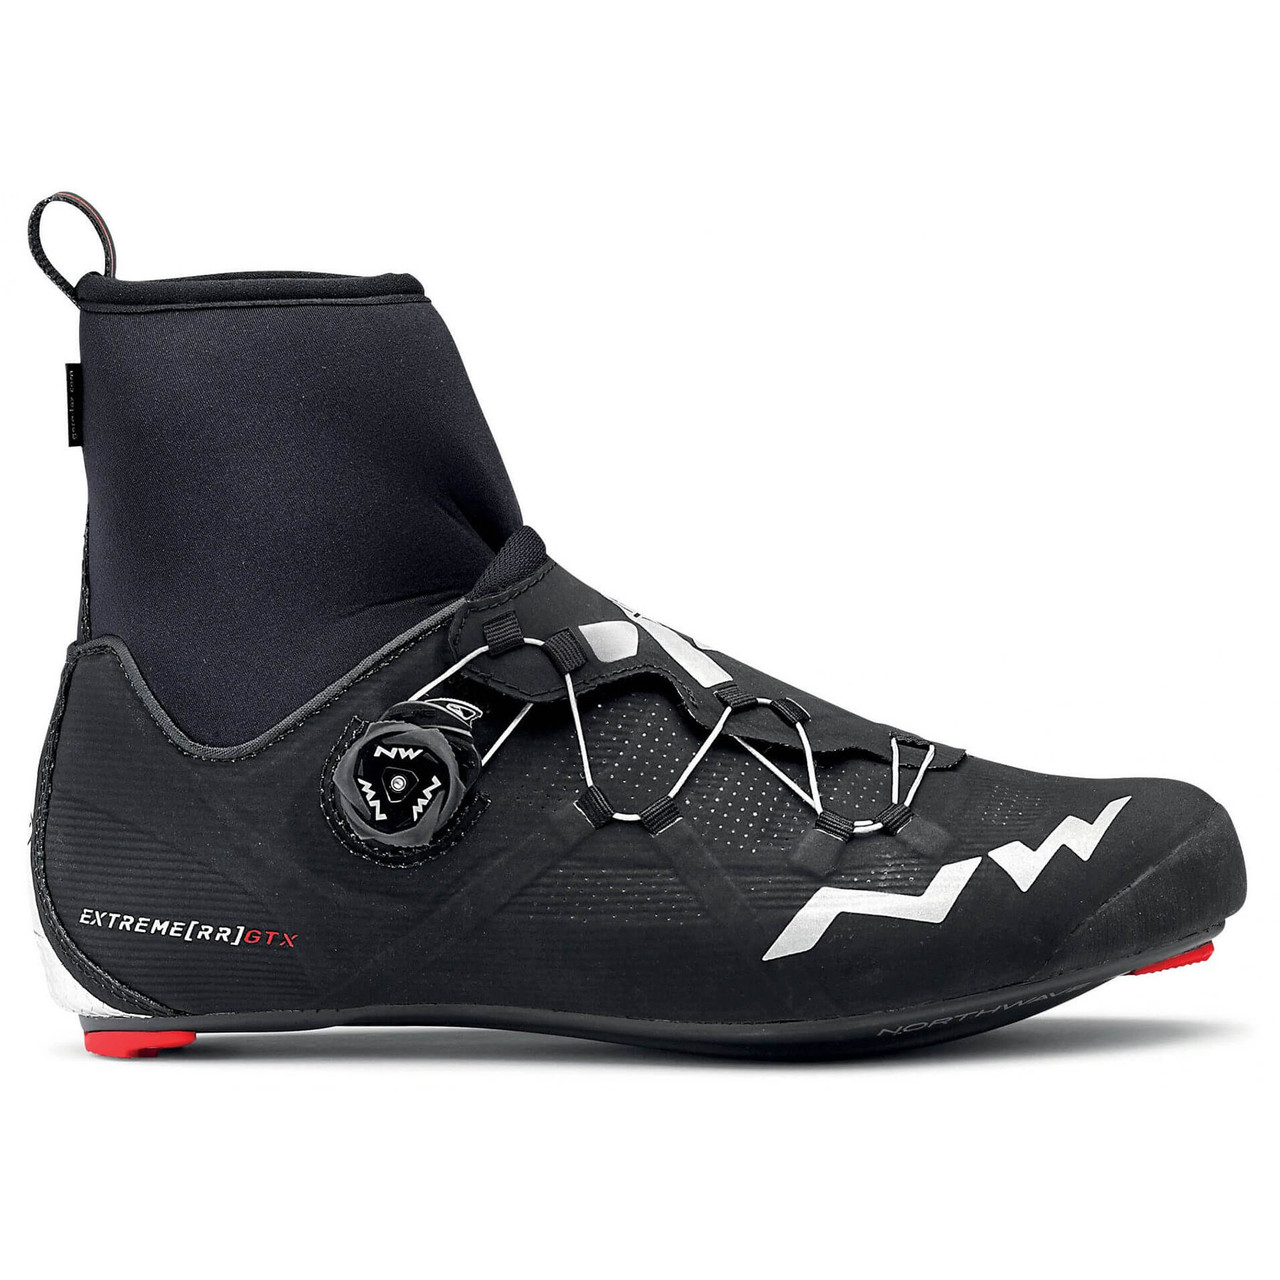 Northwave Shoes Extreme RR Free Shipping 